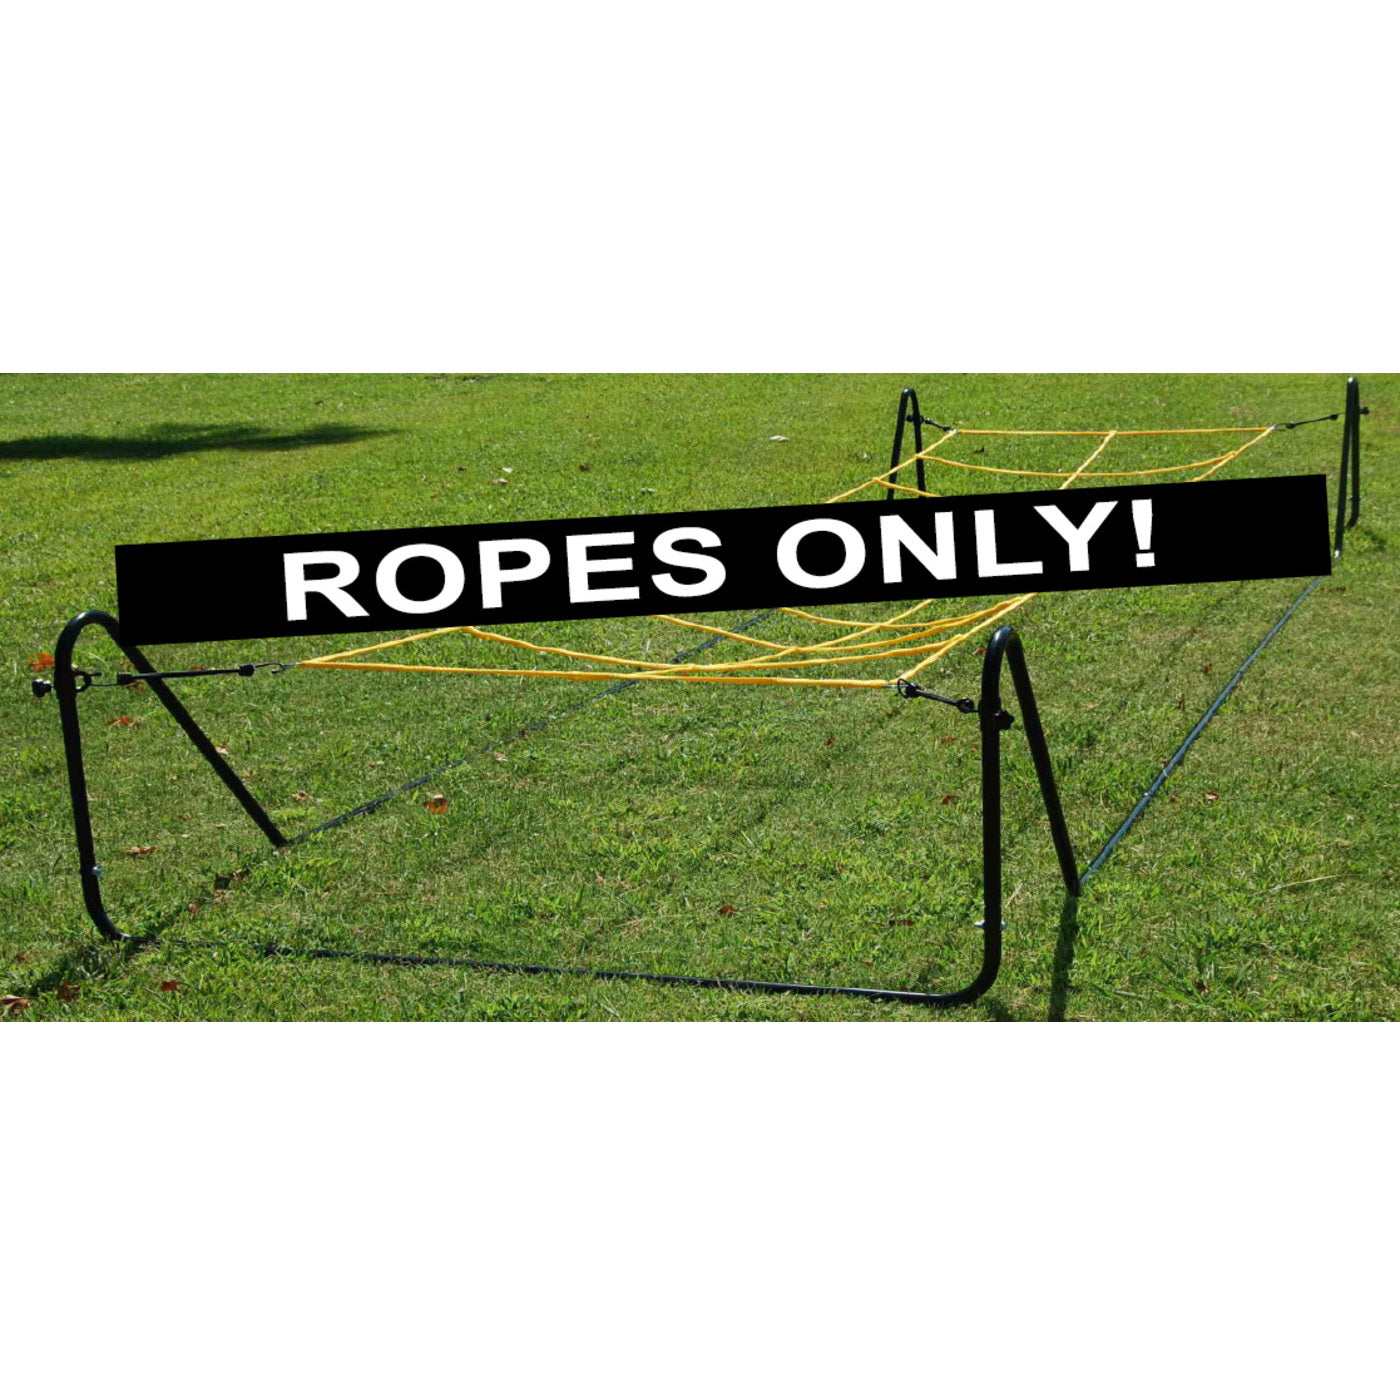 trigon sports replacement football running ropes ropes only